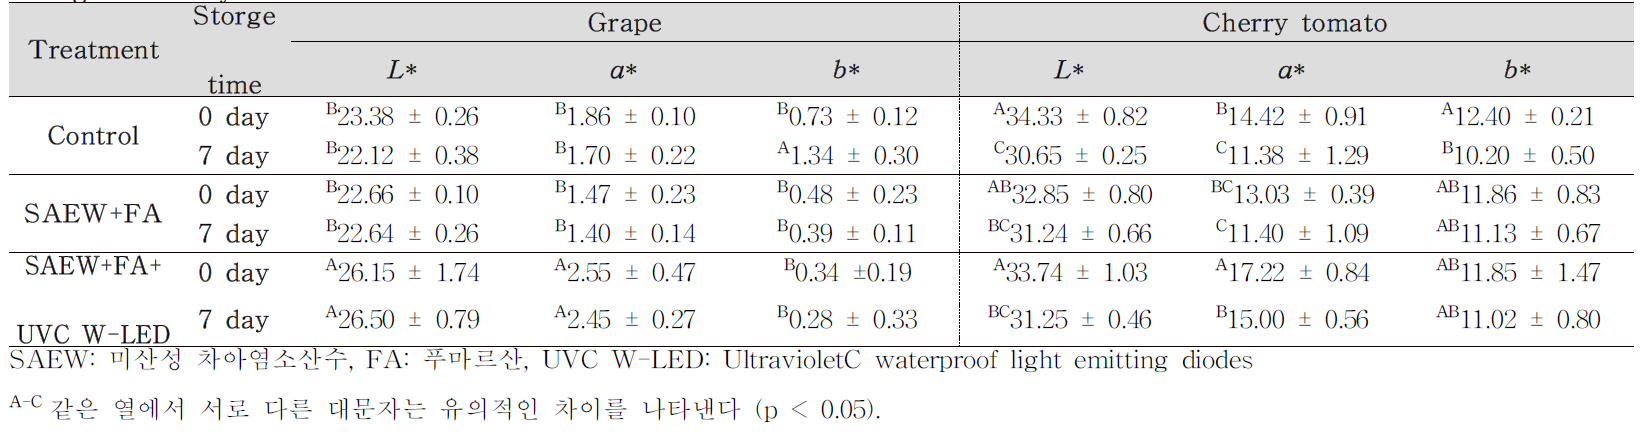 Effectiveness of disinfection treatments on color parameters (L*, a*, and b*) in grape and cherry tomato after storage for 7 days at 15°C